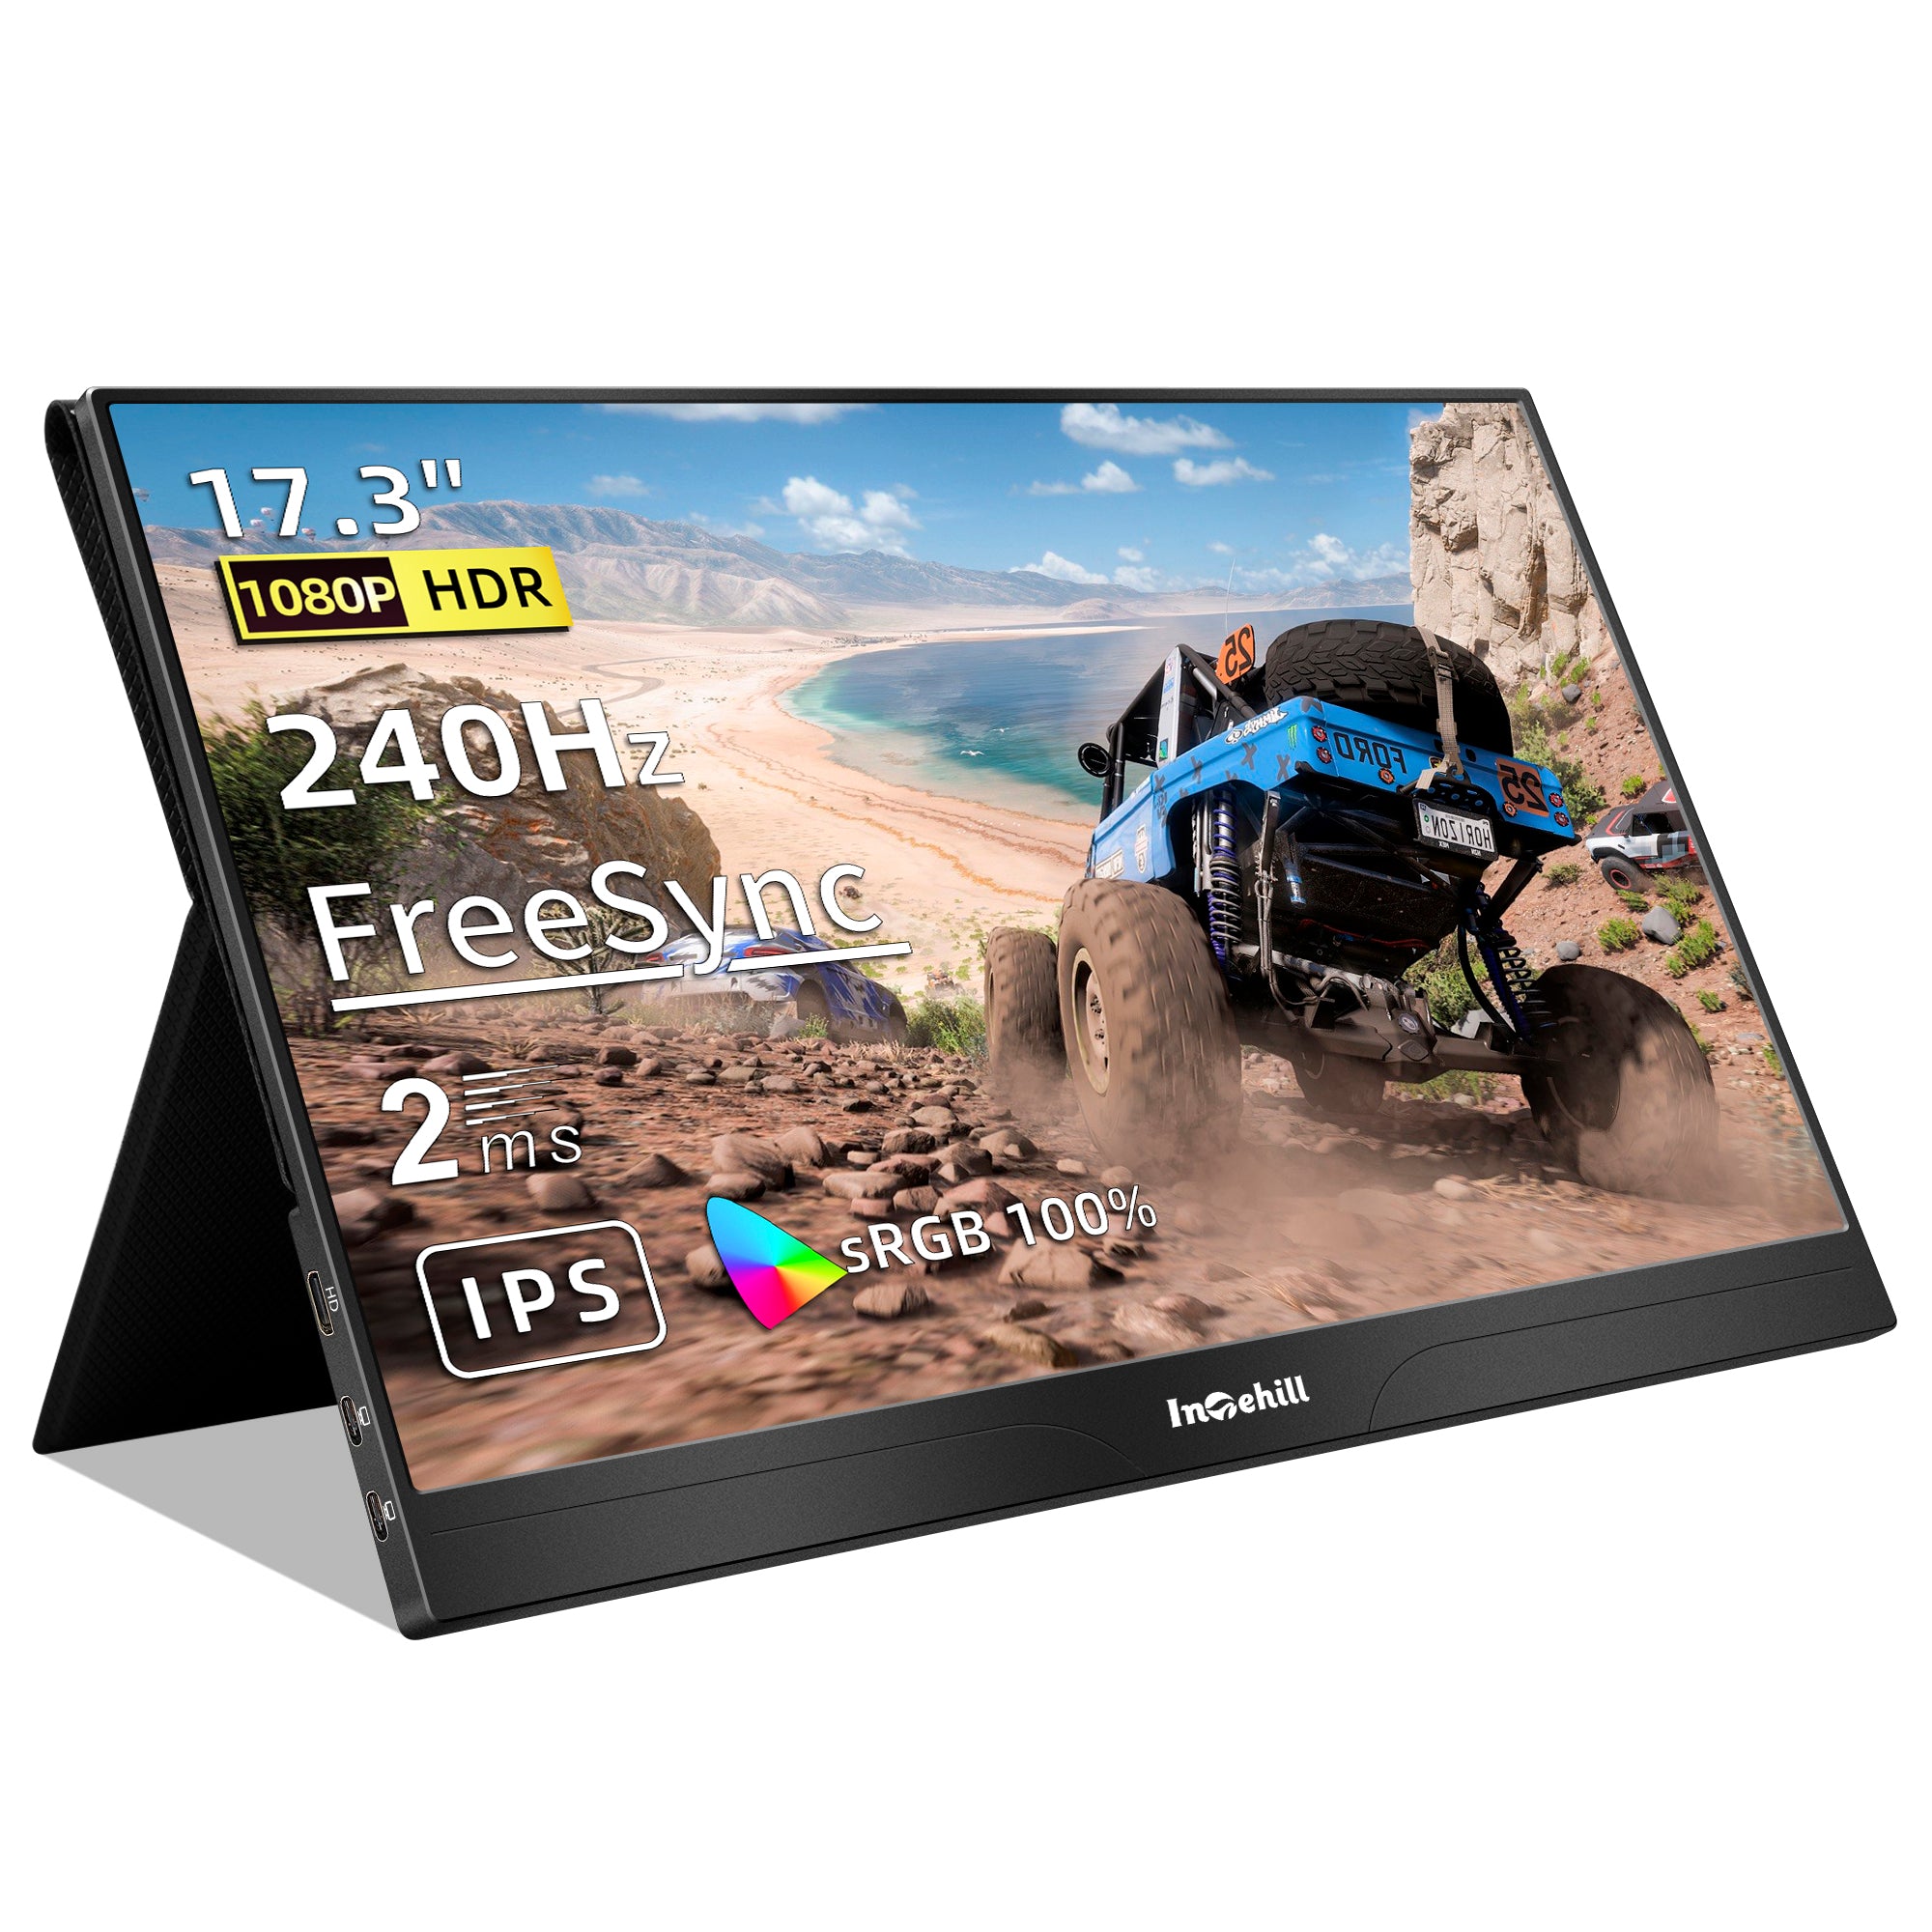 Portable Gaming Monitor 240hz 17.3 Inch for FPS Games, PS5, Xbox – Intehill